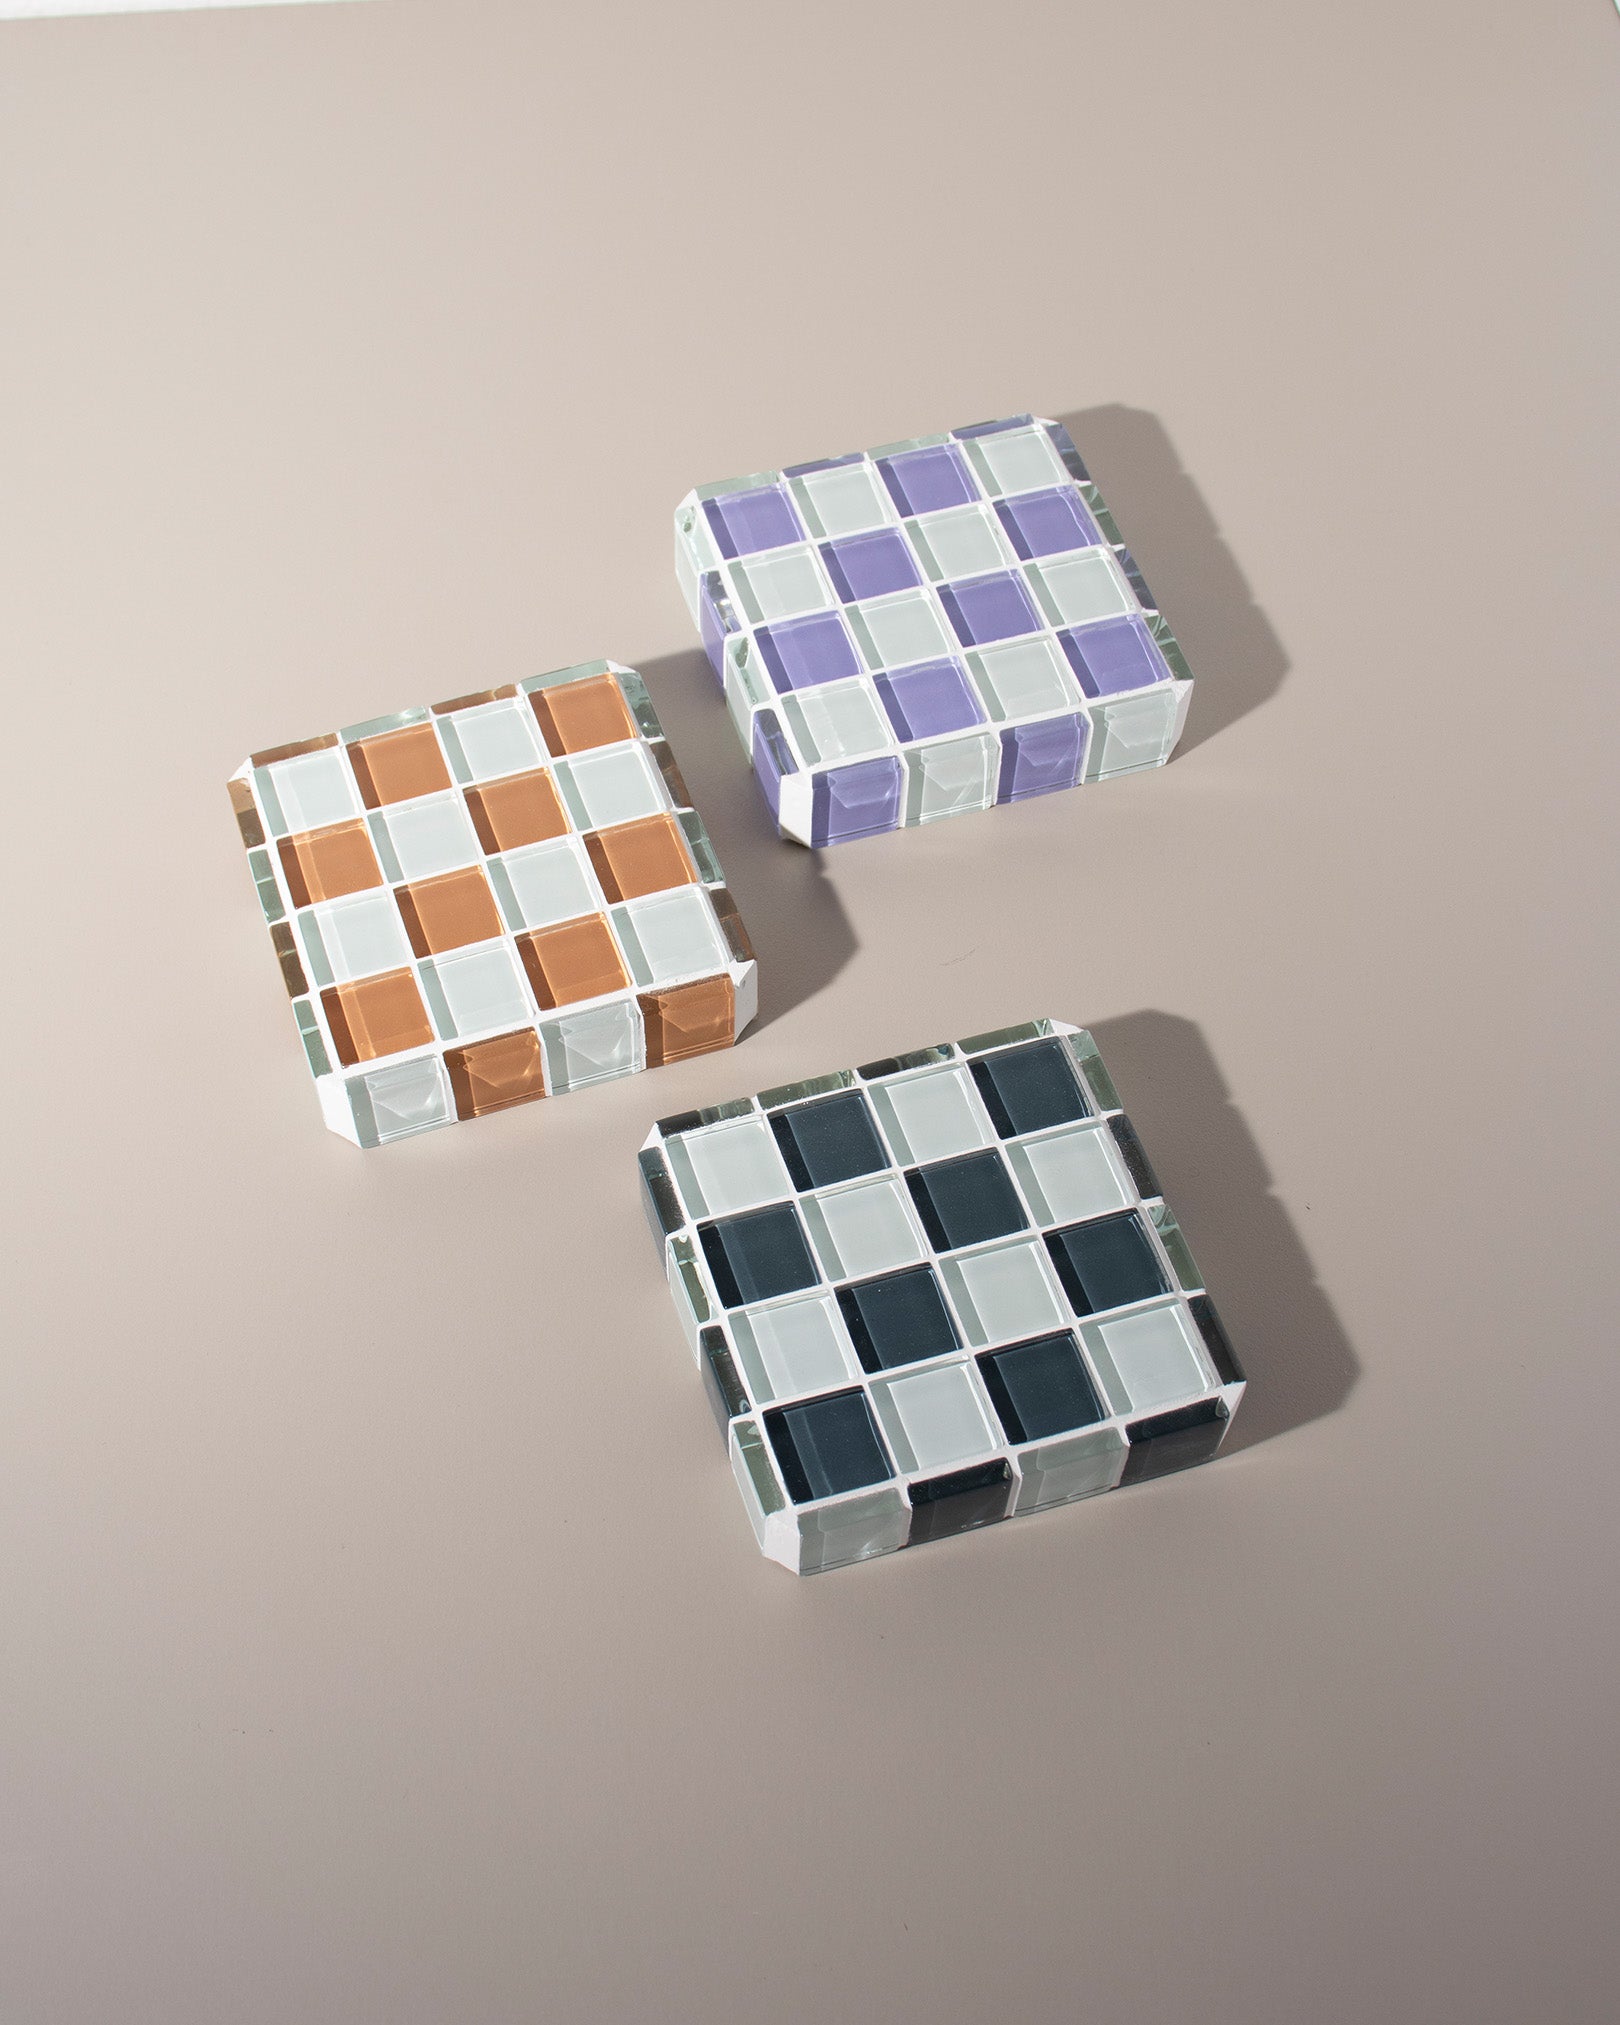 GLASS TILE CUBE - Stone Wall